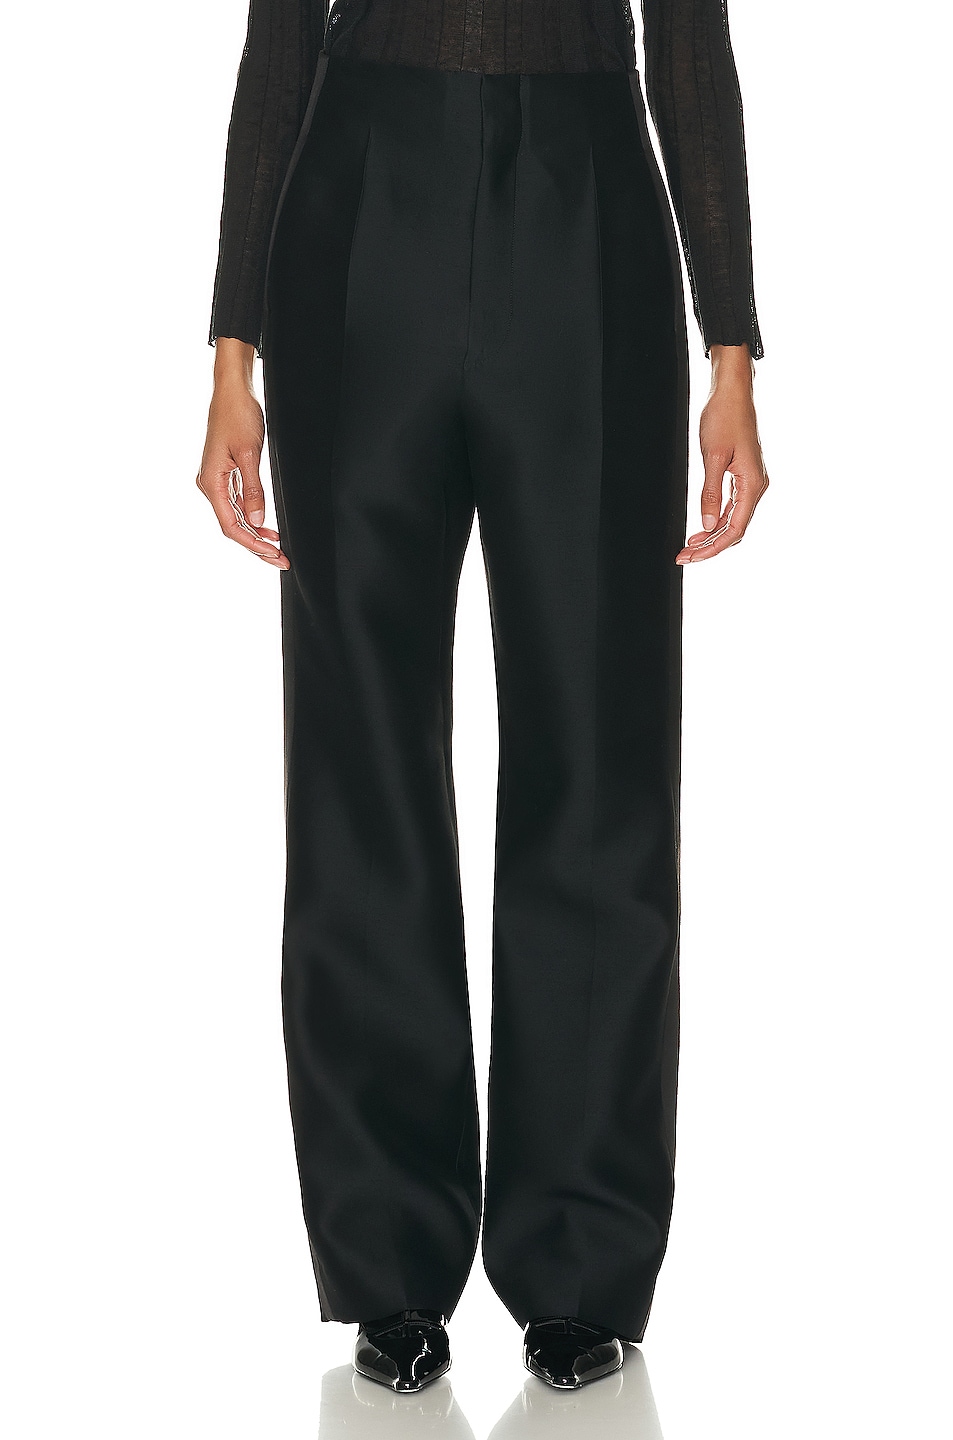 Image 1 of The Row Hector Pant in Black